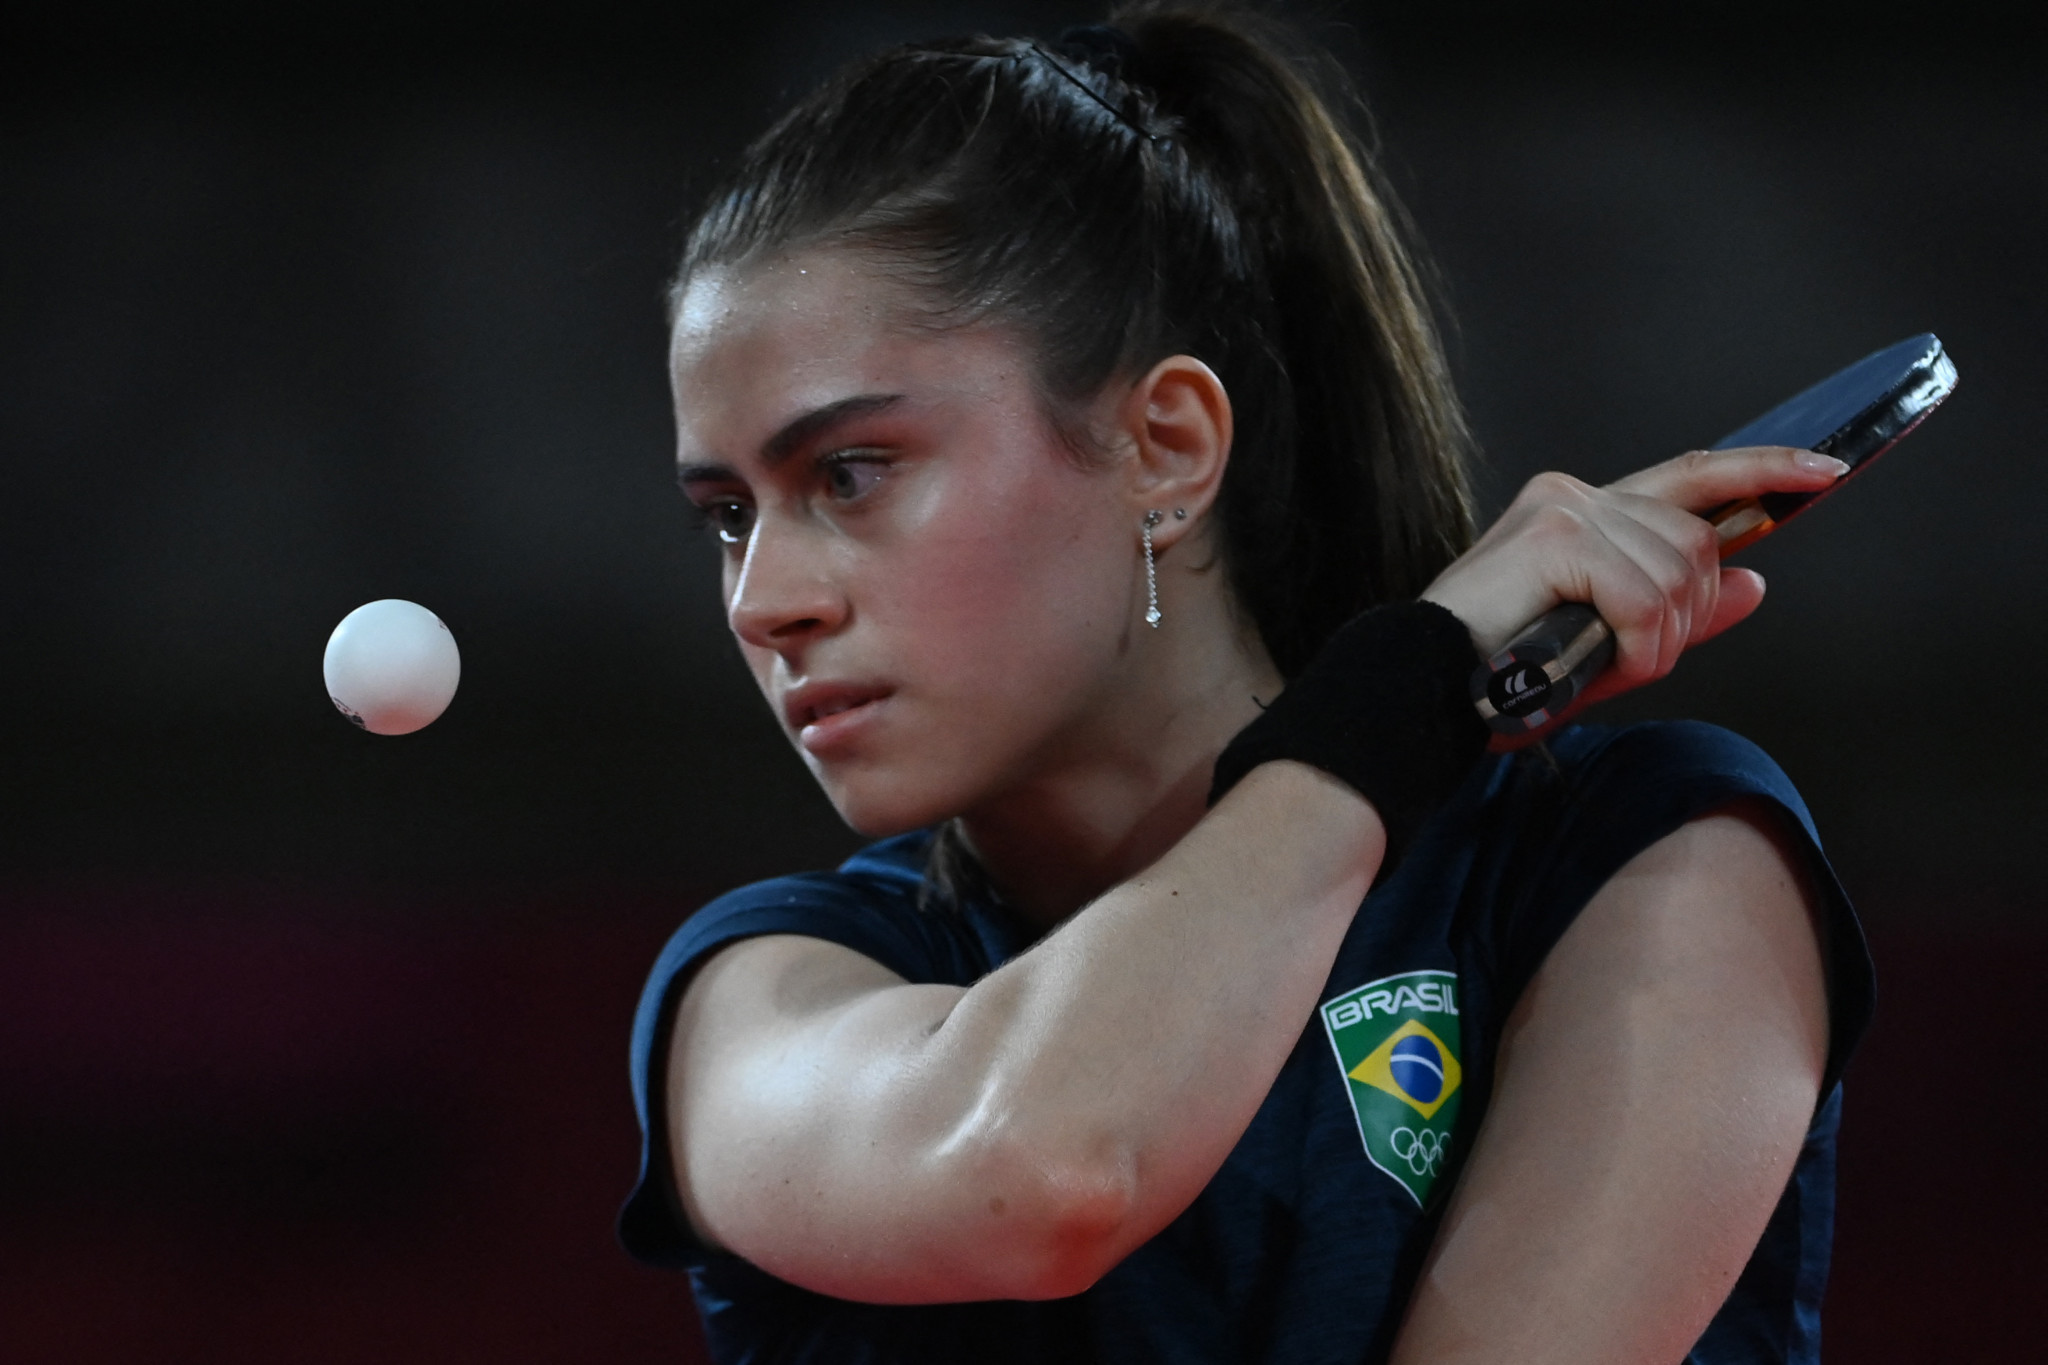 Brazil win both team titles to close out ITTF Pan American Championships